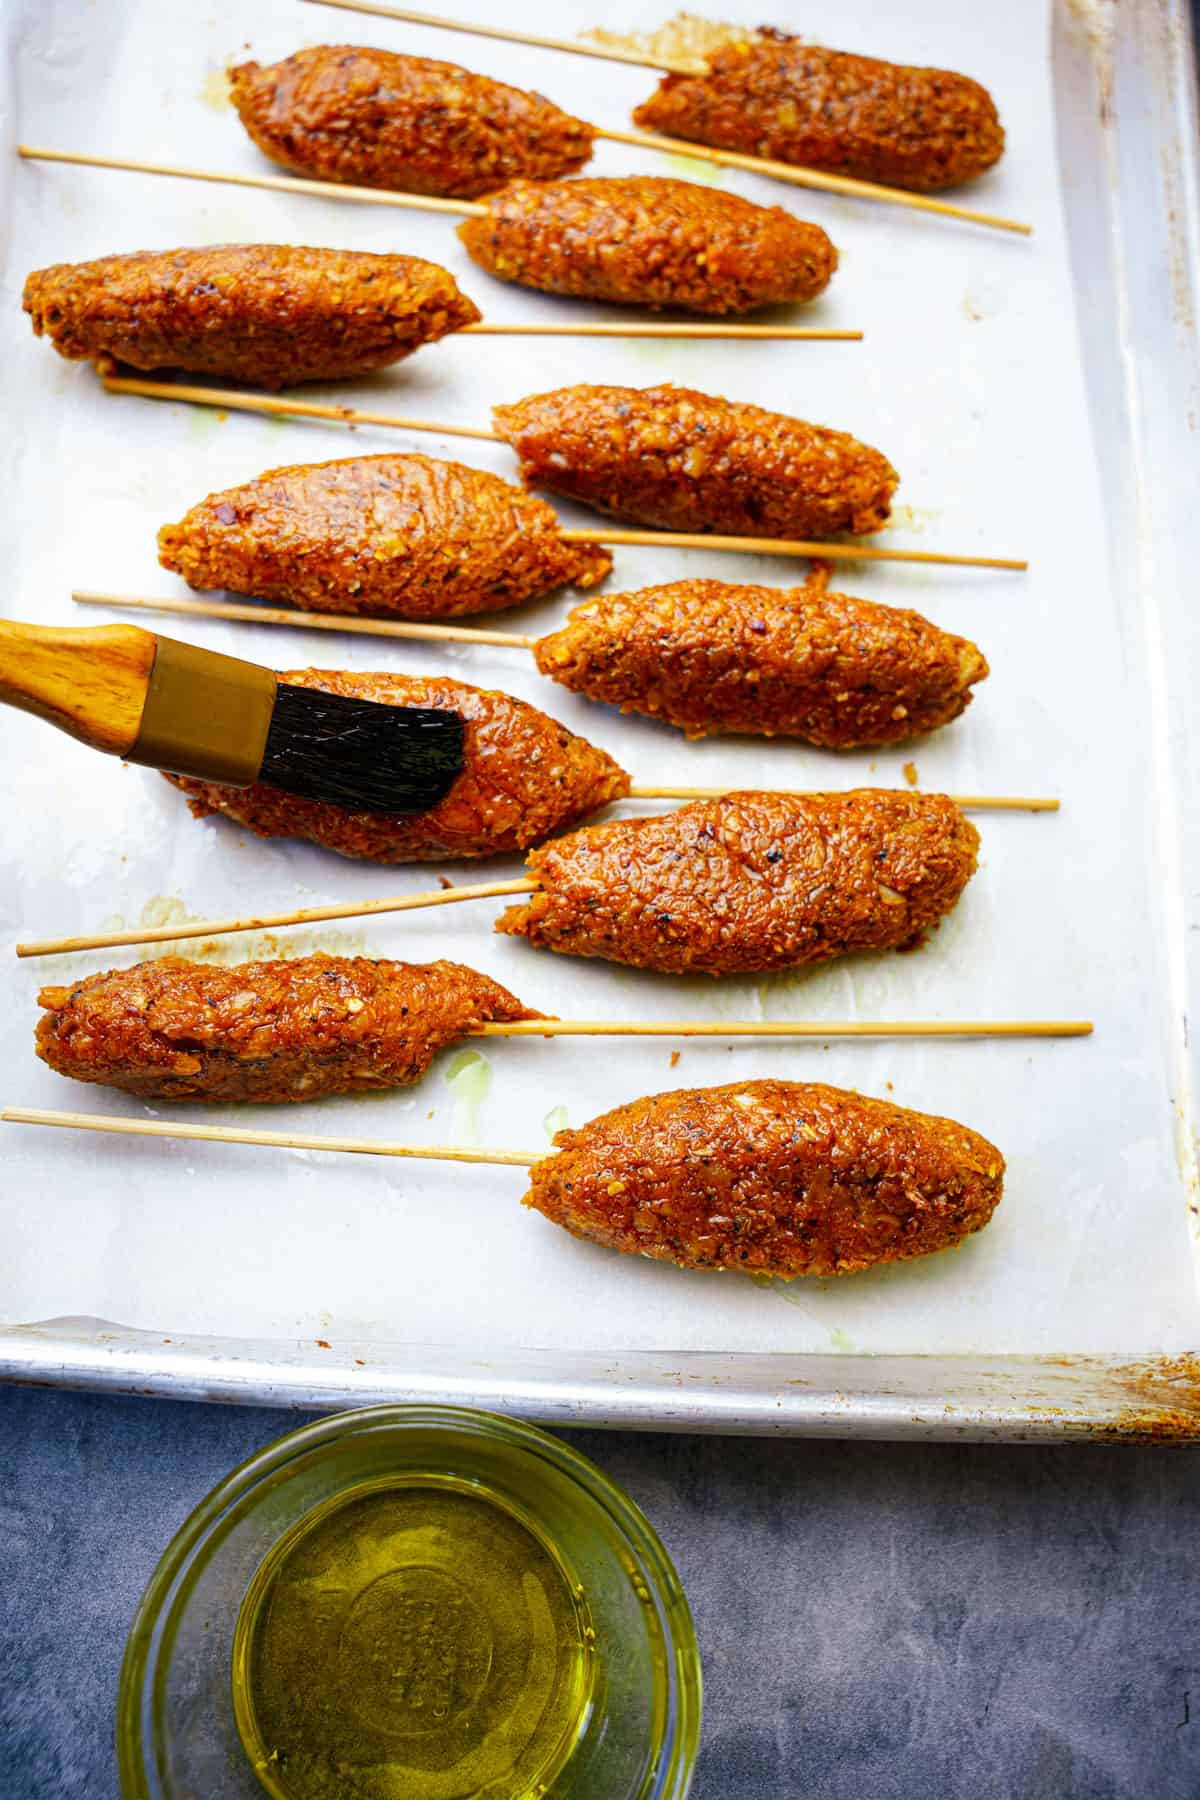 vegan kofta is brushed with olive oil.